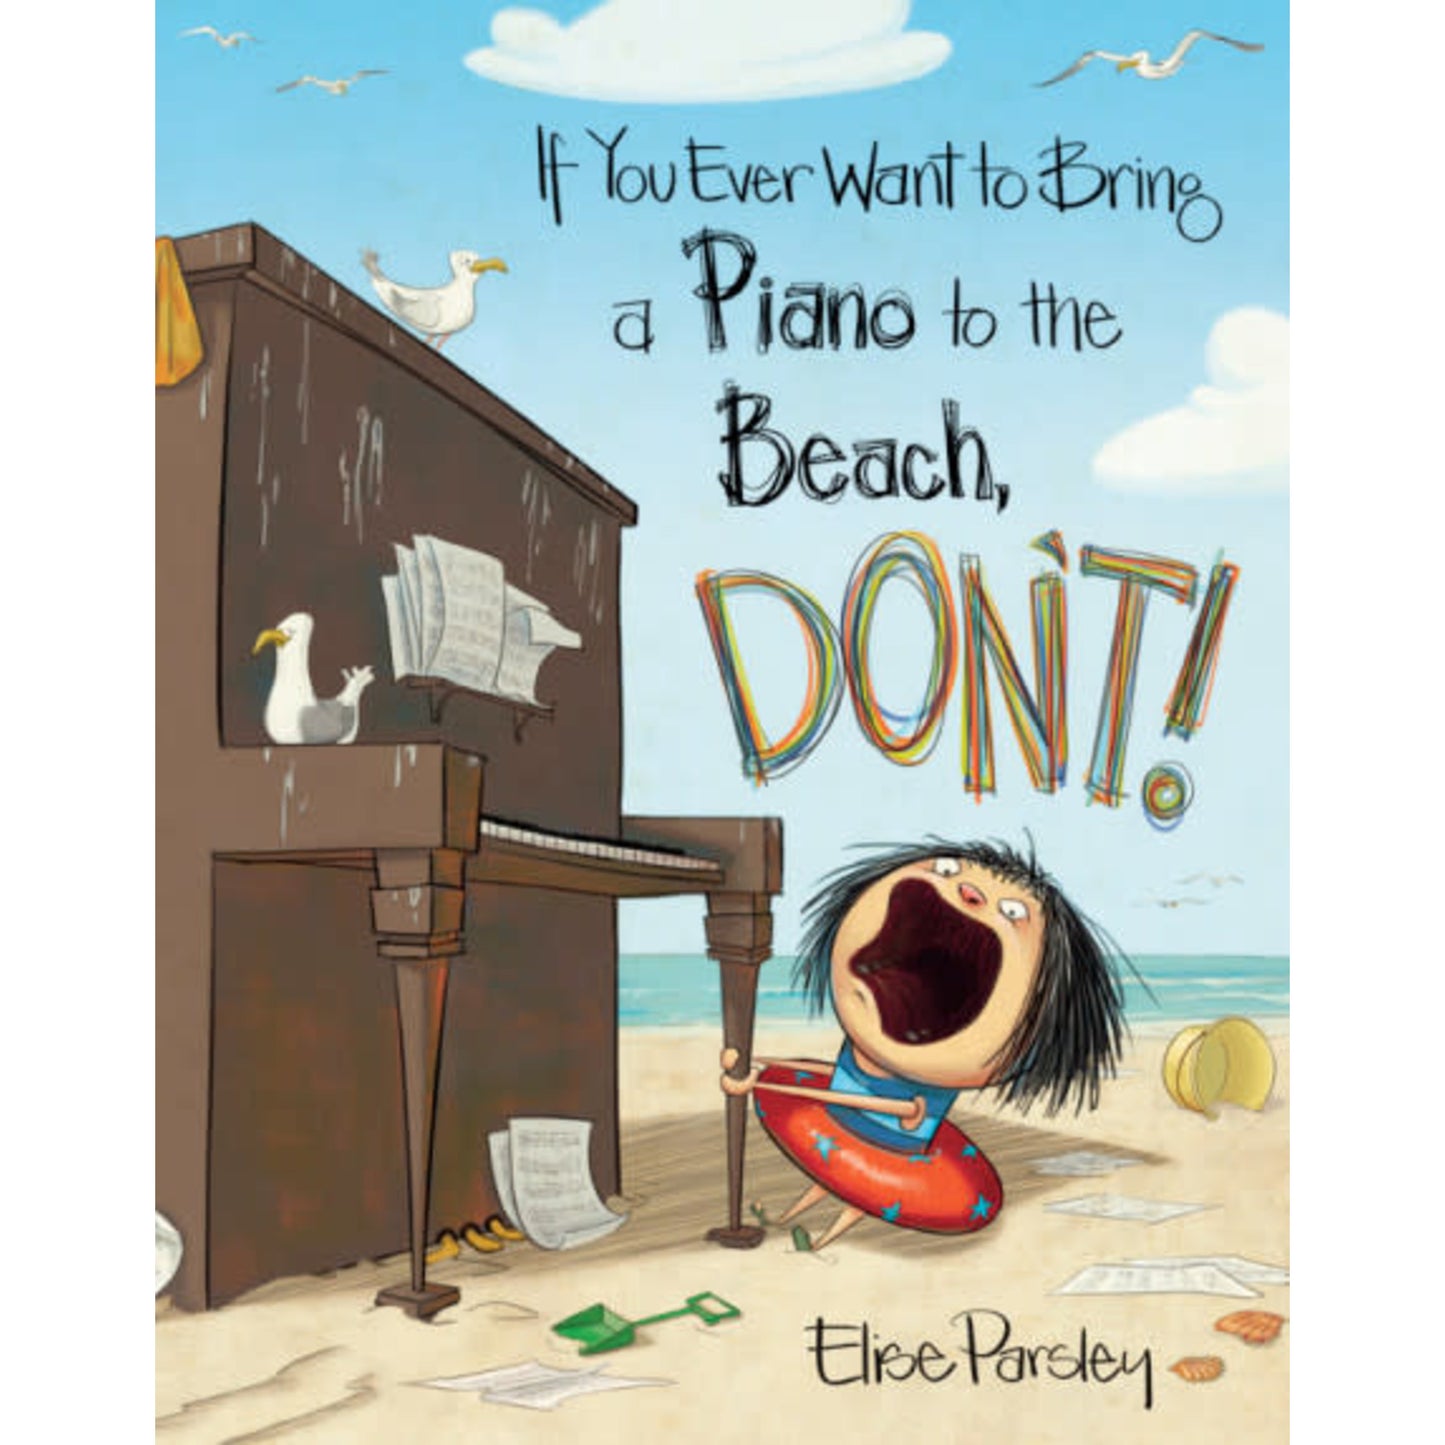 If You Ever Want to Bring a Piano to the Beach, Don’t!, Parsley